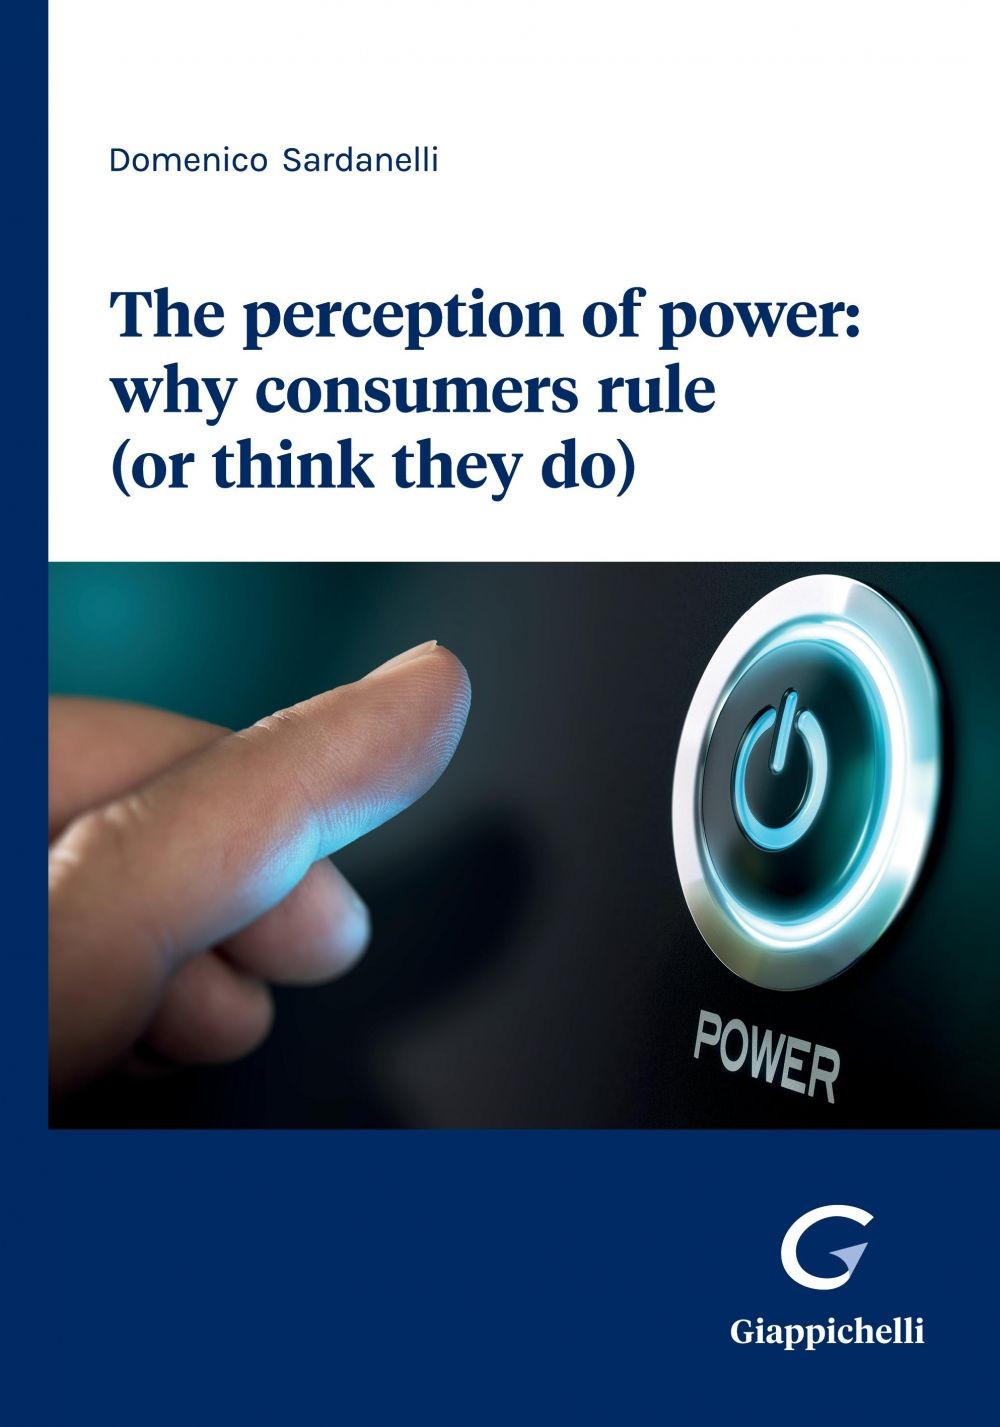 The perception of power: why consumers rule (or think they do) - e-book - Librerie.coop